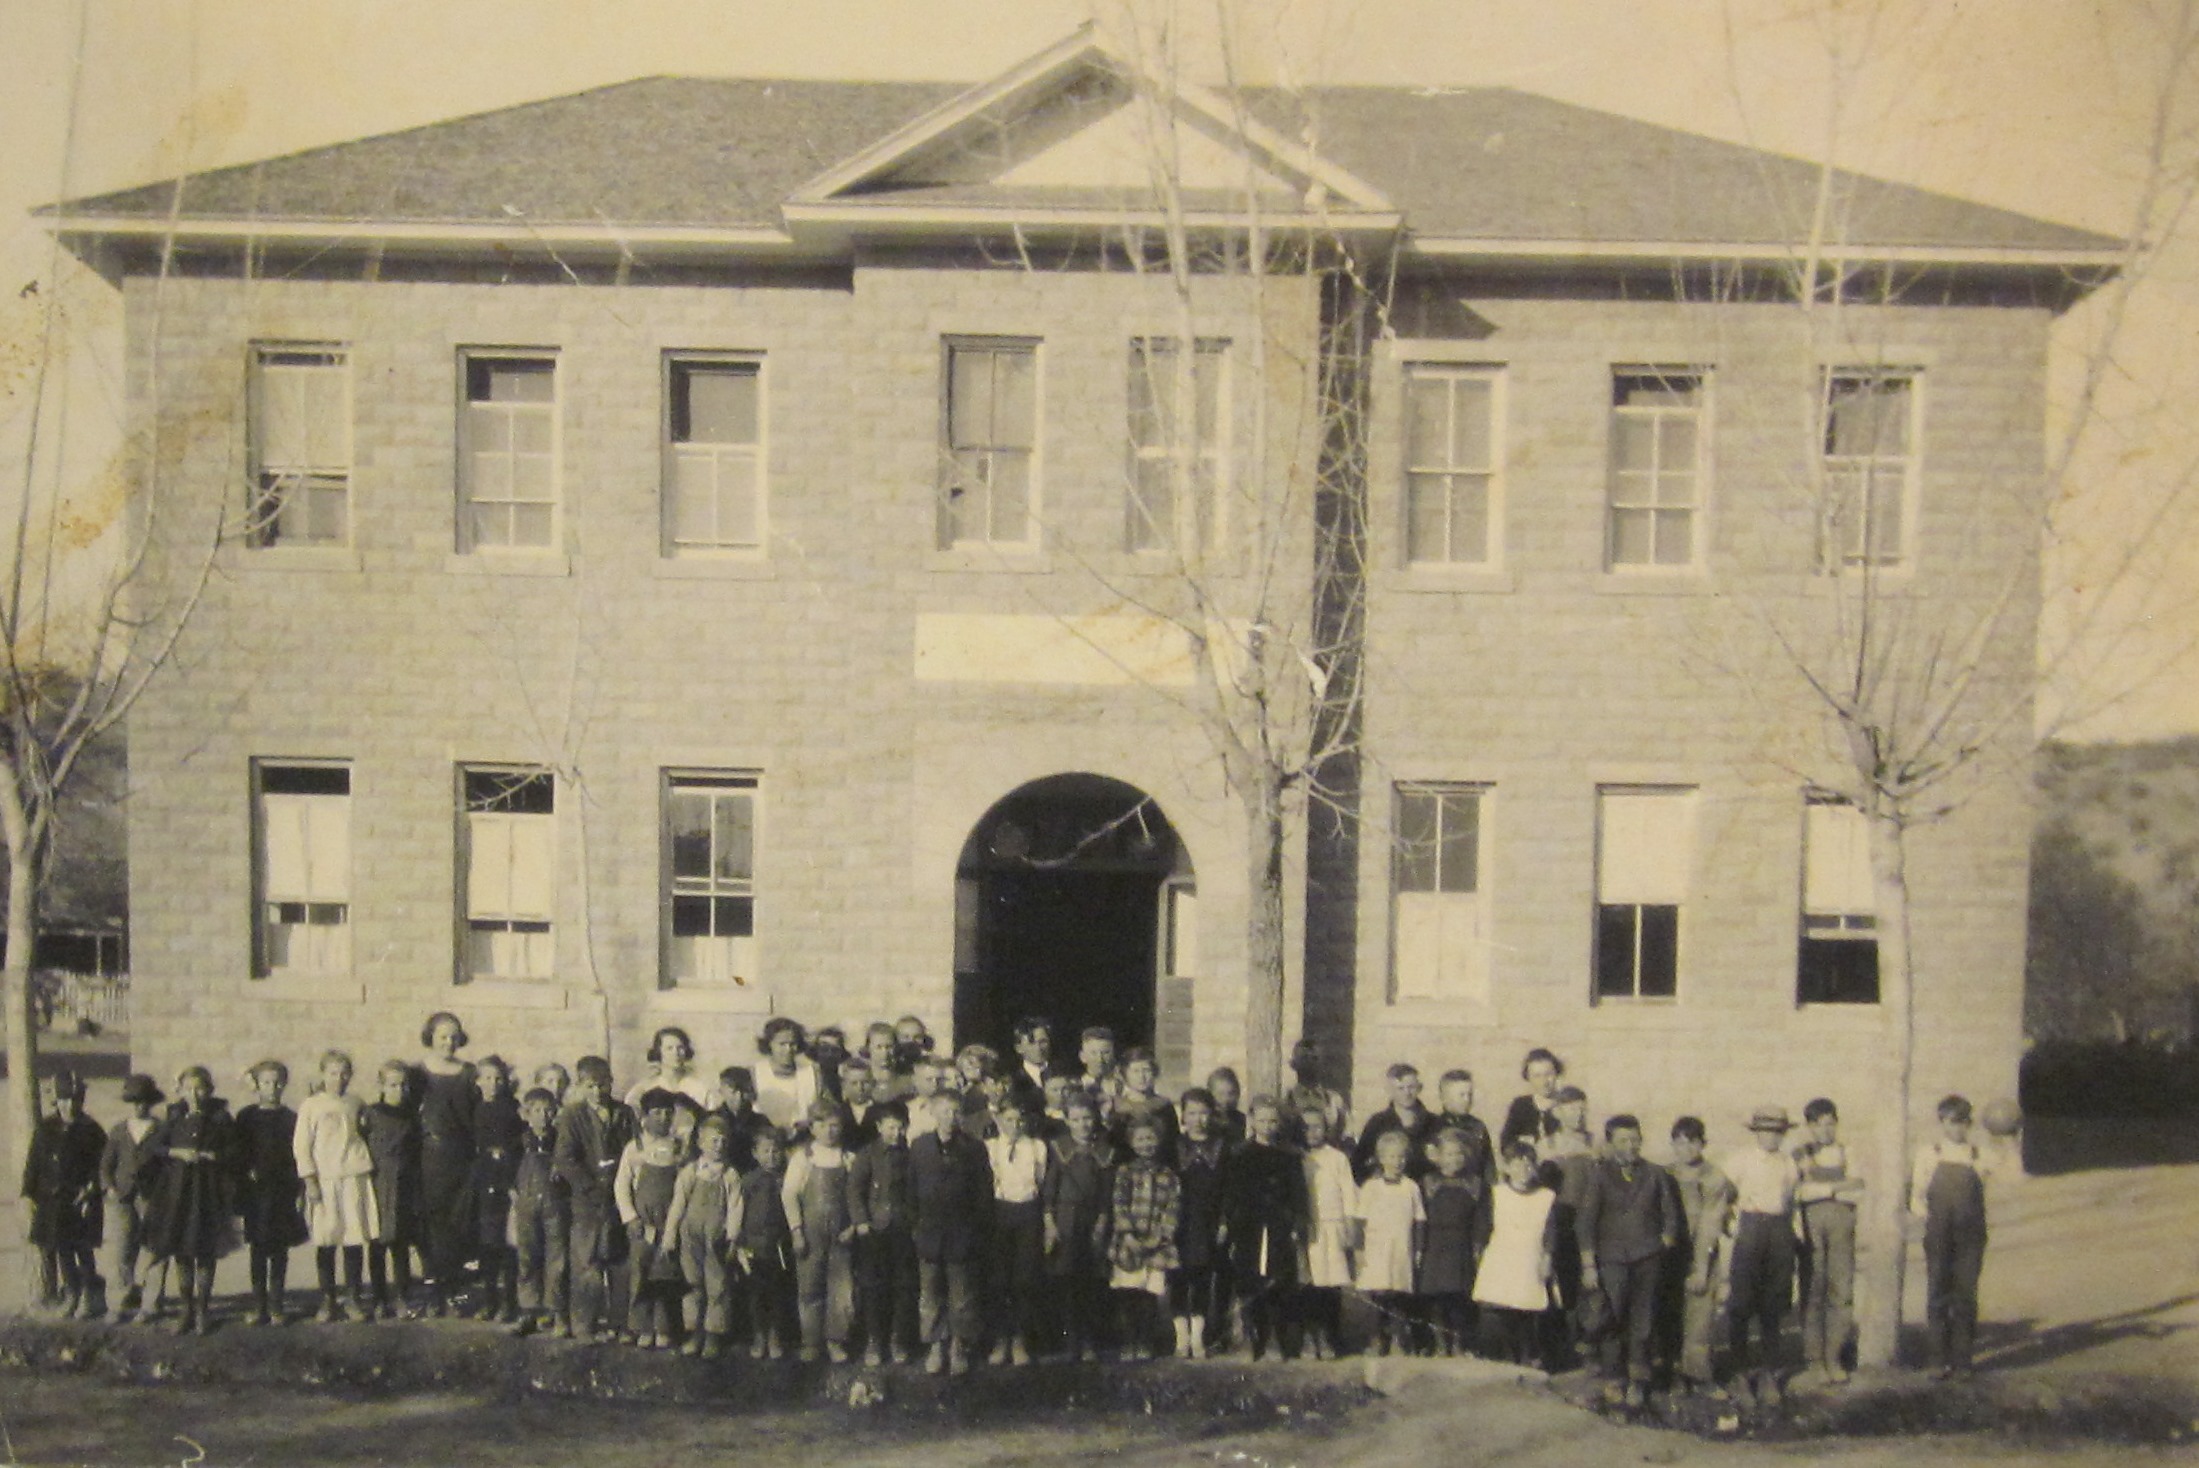 Old Santa Clara School with students out in front